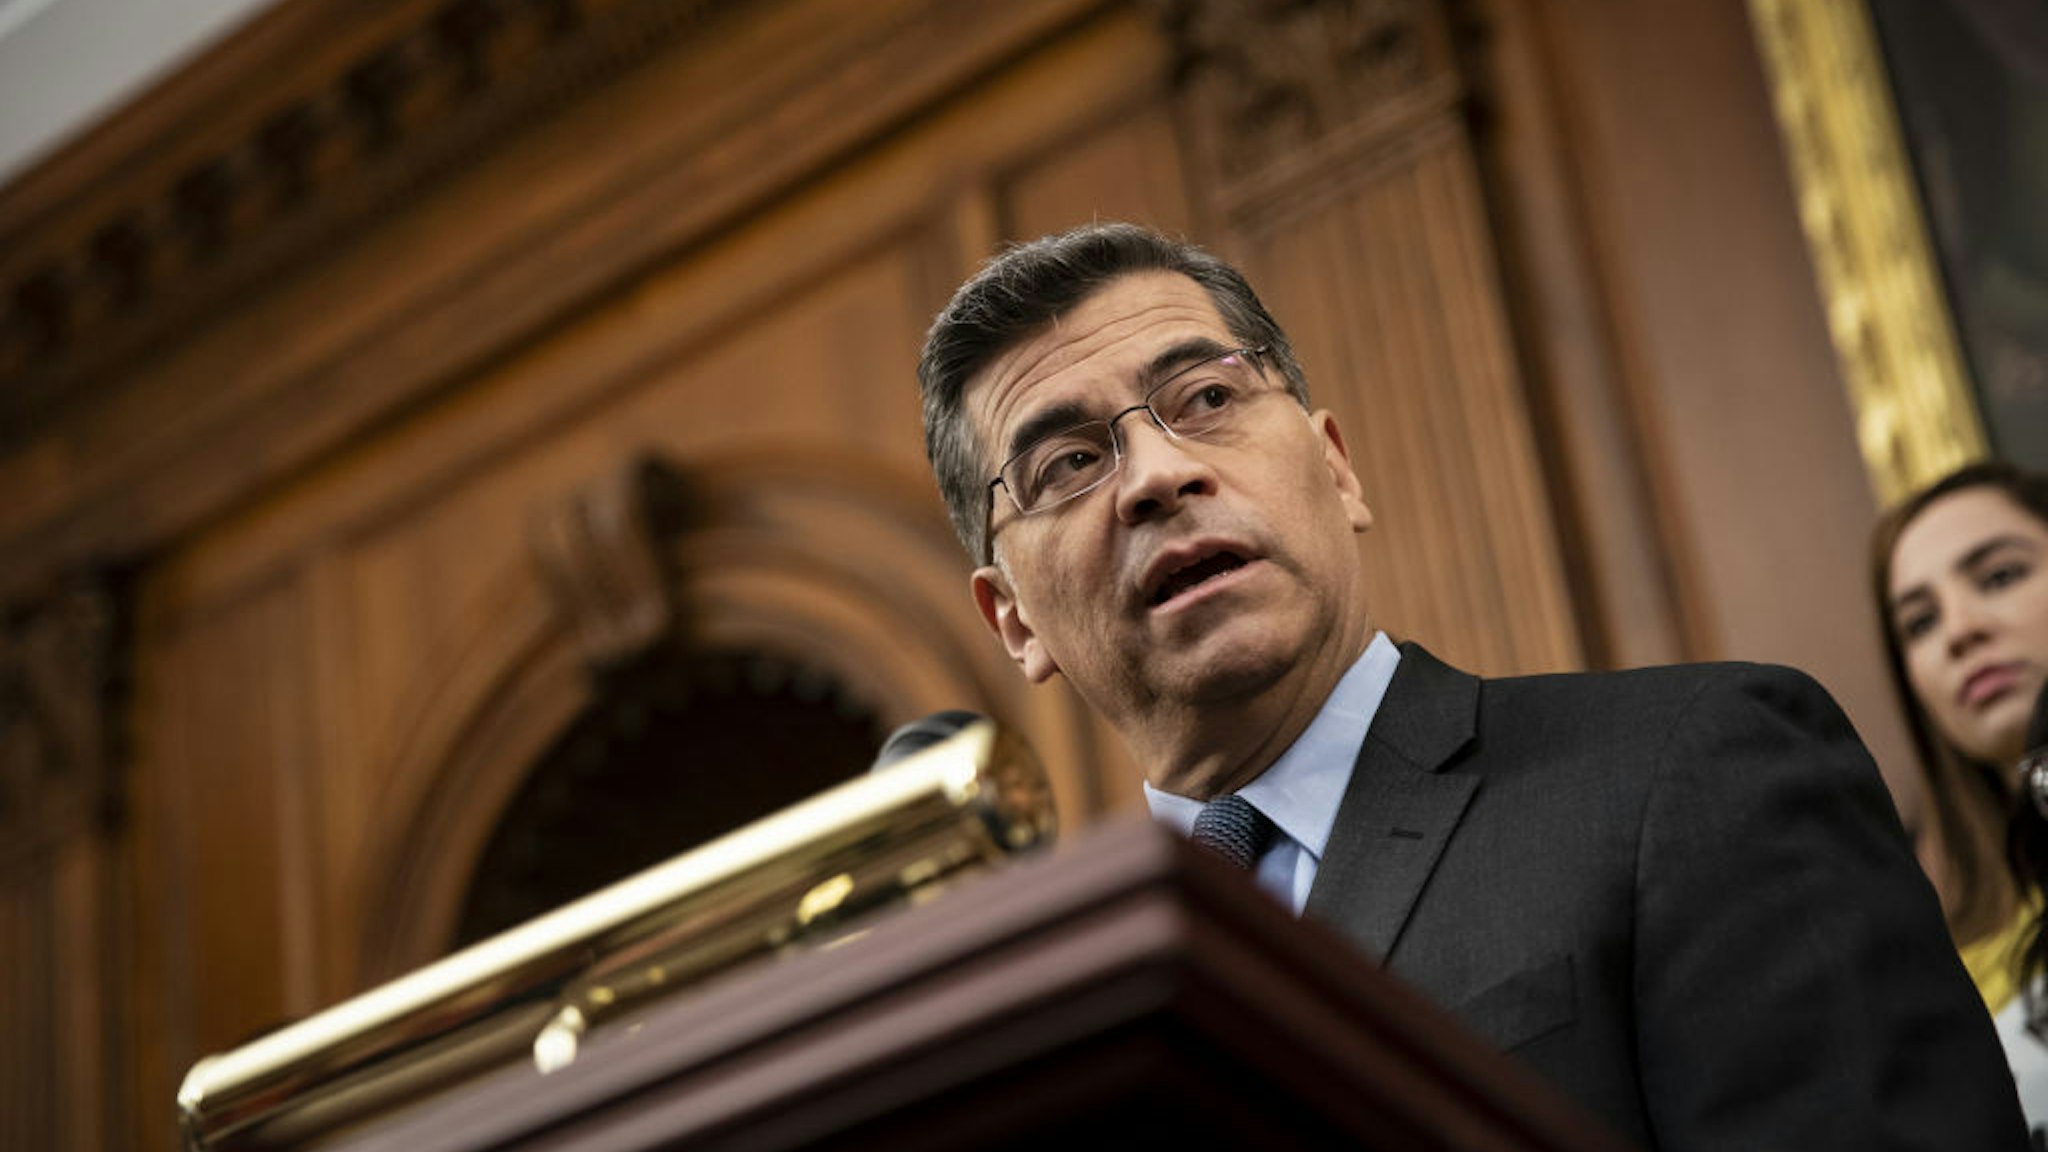 Xavier Becerra, California's attorney general, speaks during a news conference on Capitol Hill in Washington, D.C., U.S., on Tuesday, Nov. 12, 2019. U.S. Supreme Court justices seemed inclined to let President Donald Trump cancel an Obama-era program that shields almost 700,000 young undocumented immigrants from deportation in a case with broad political and humanitarian ramifications. Photographer: Al Drago/Bloomberg via Getty Images